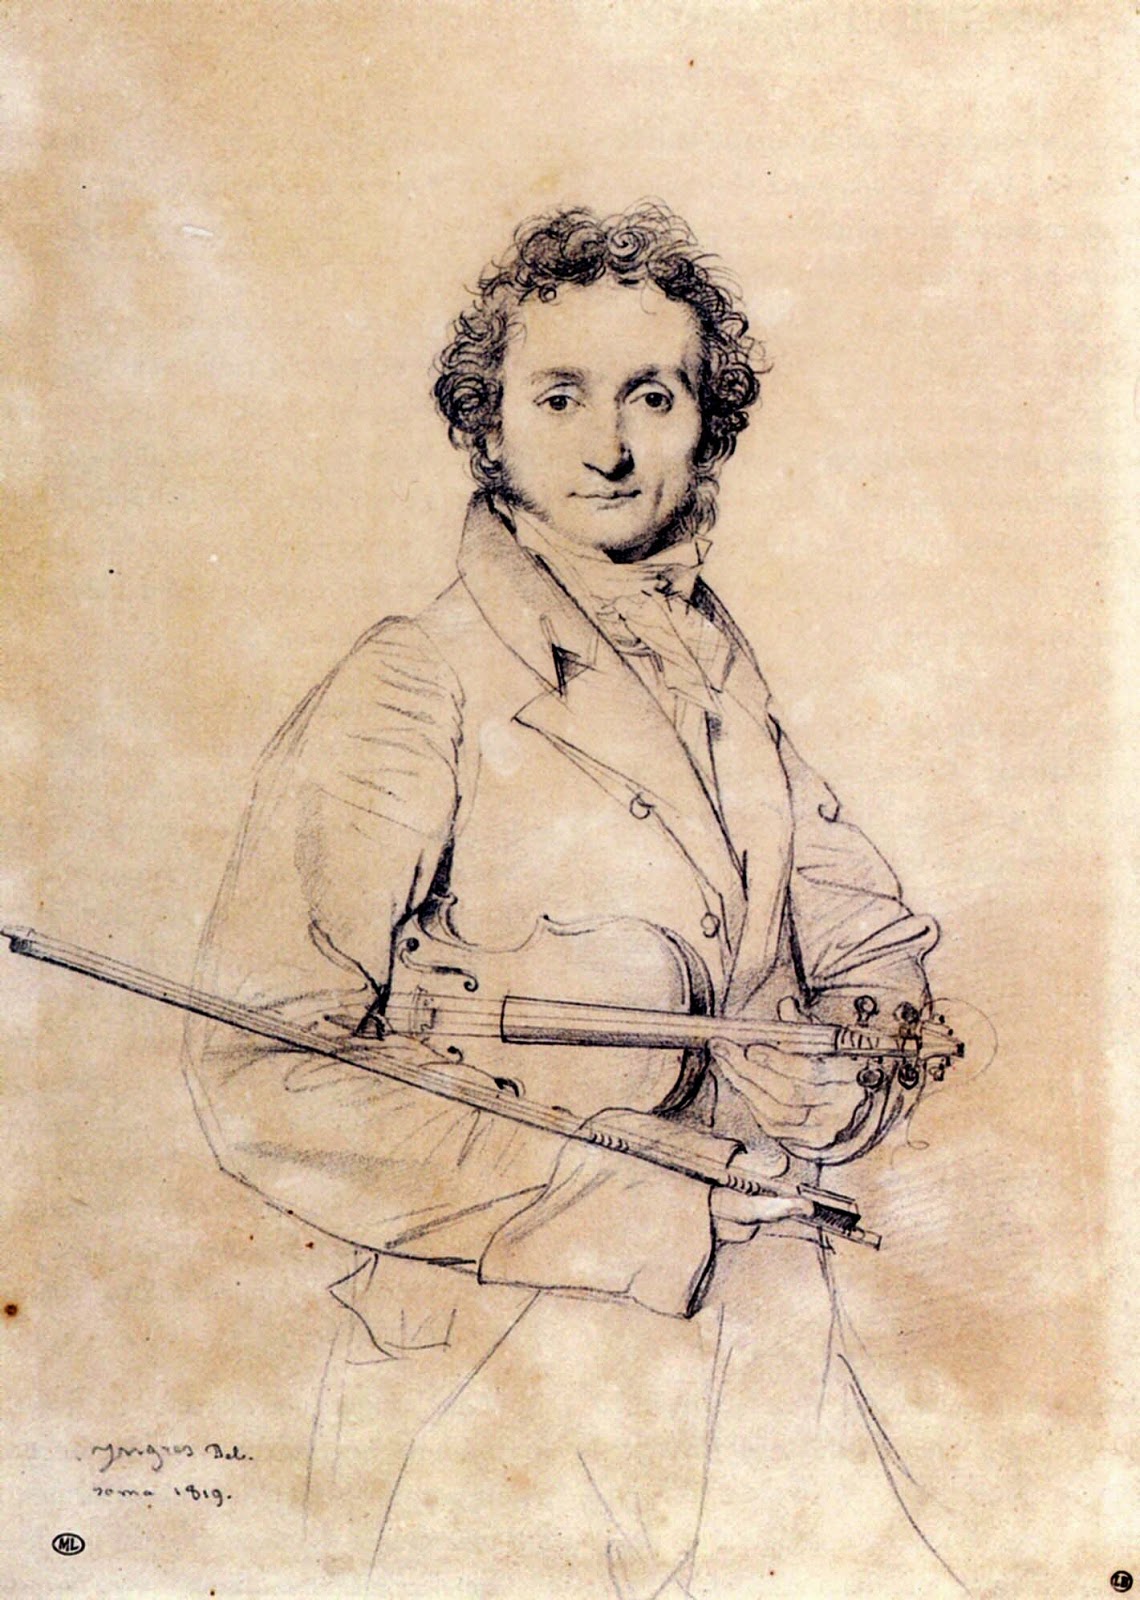 Paintings by Jean Auguste Dominique Ingres